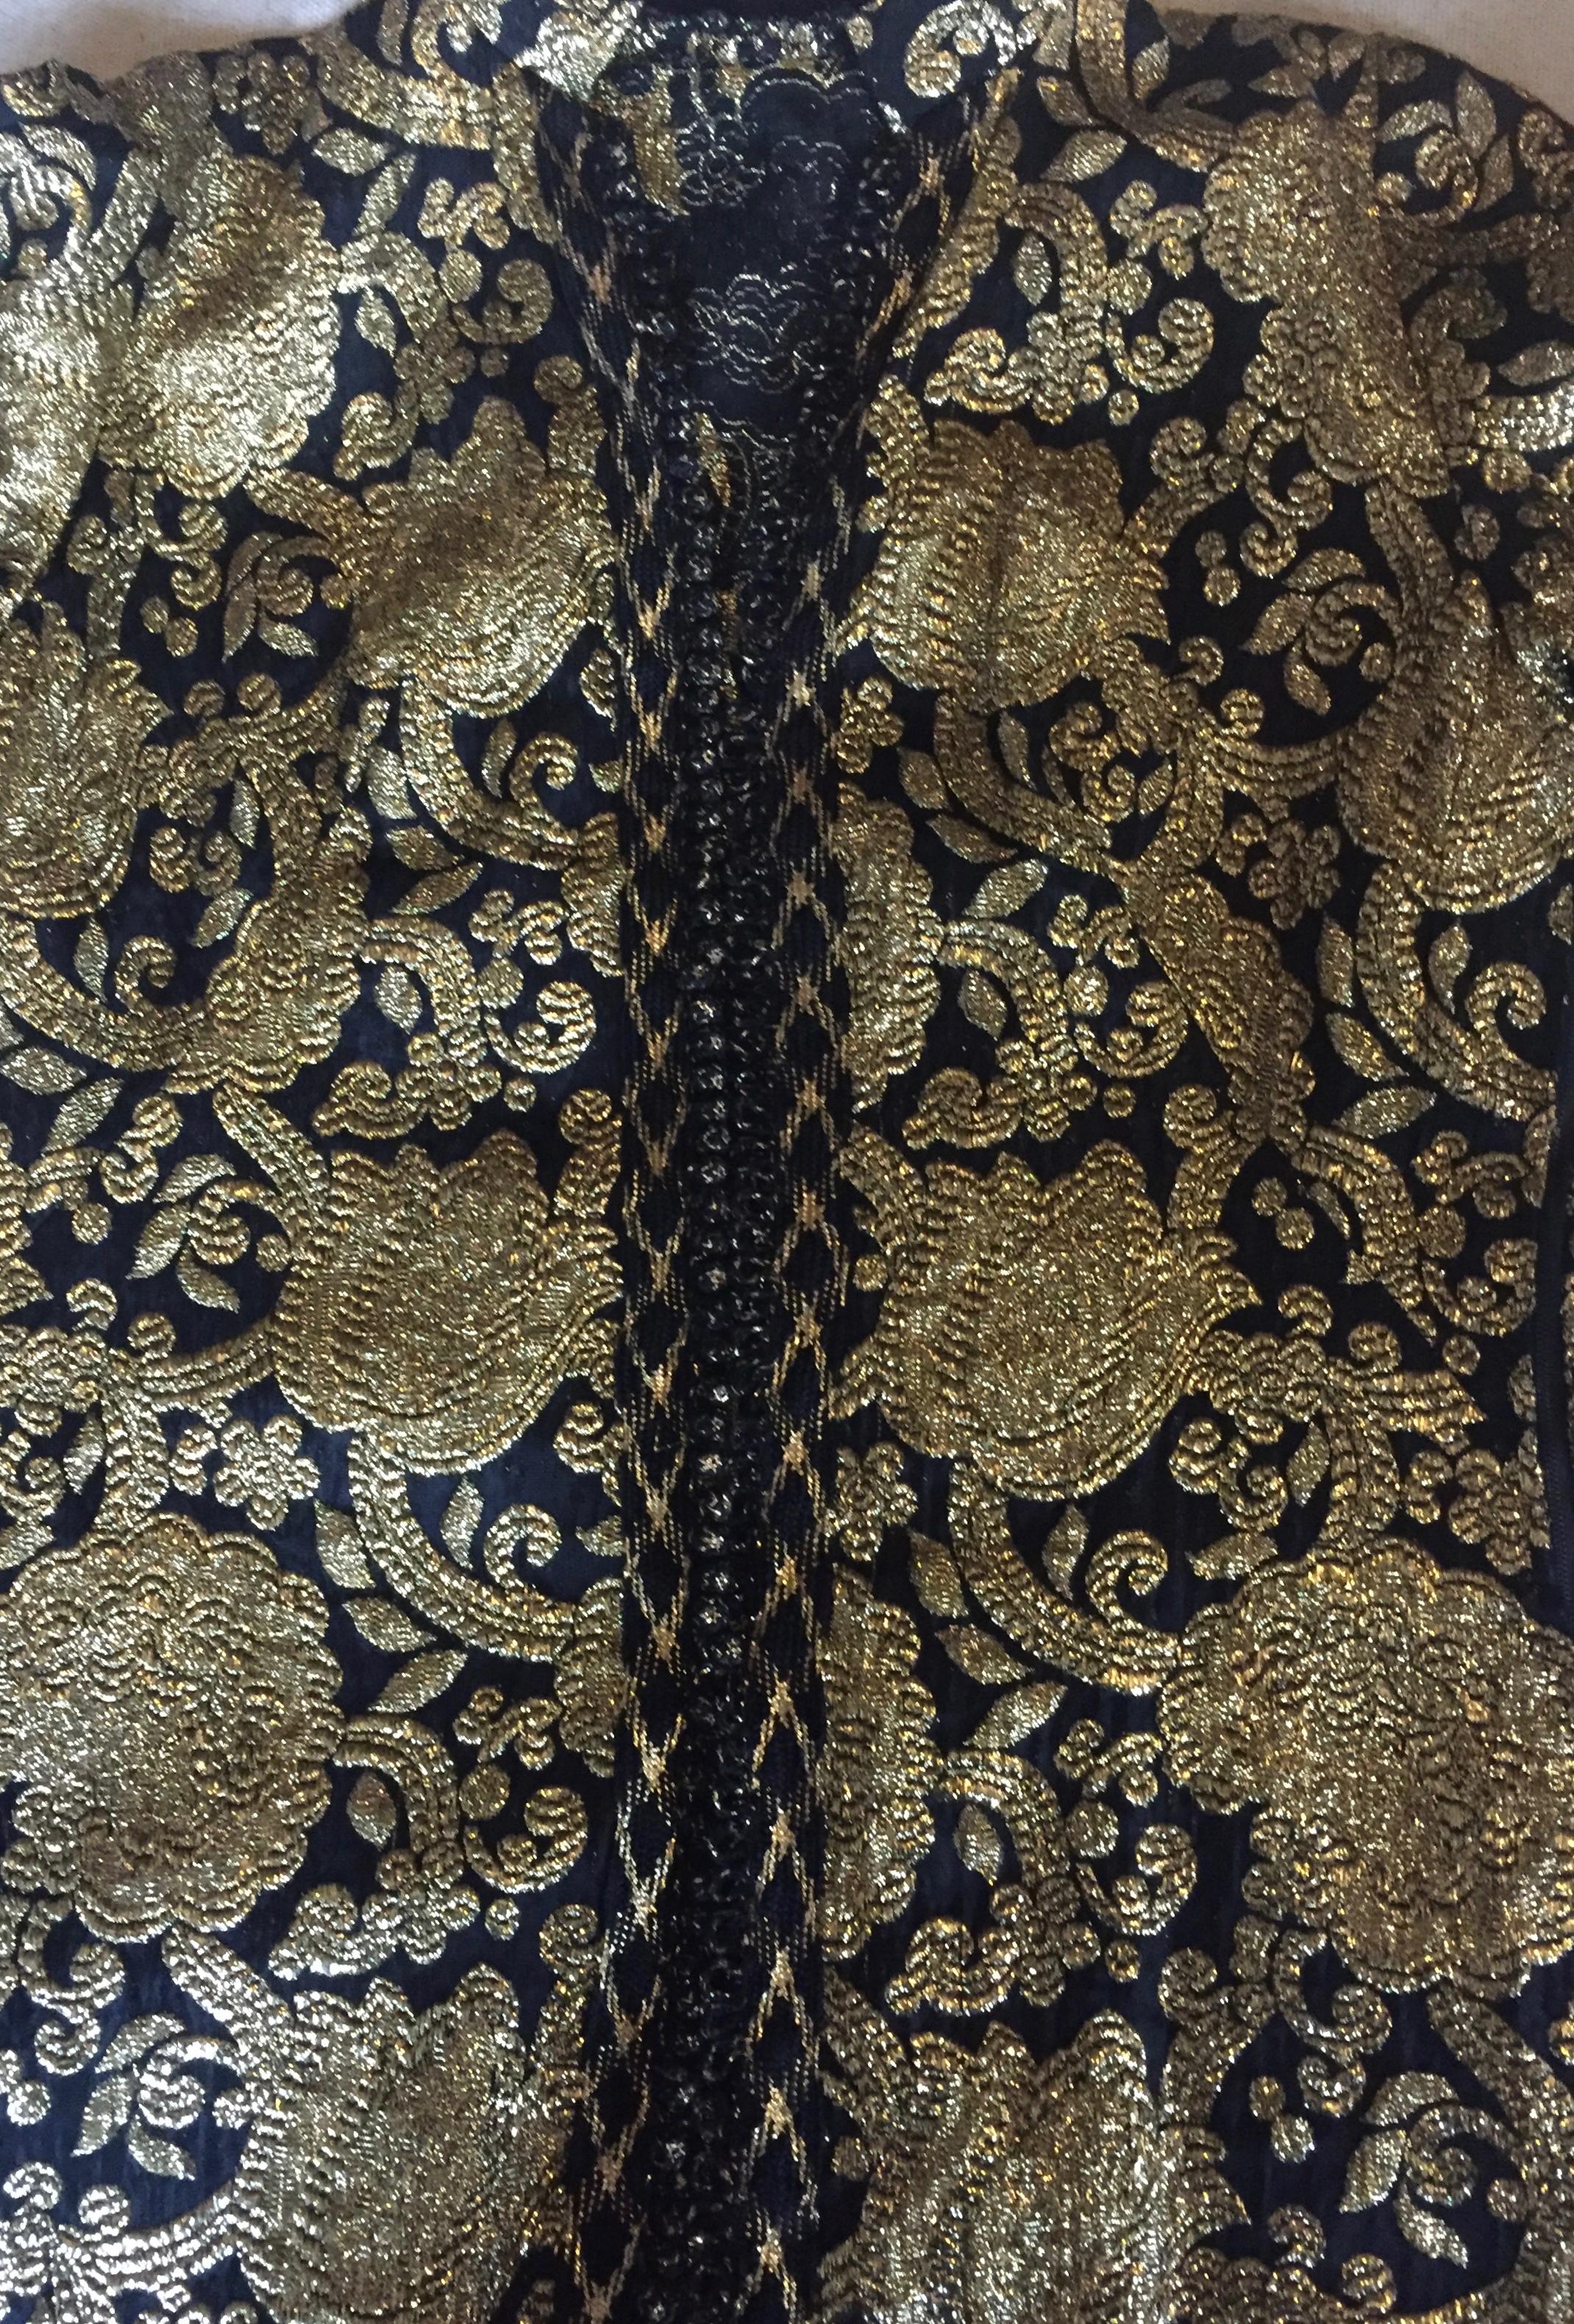 Vintage Gold and Black Brocade Dress/Jacket with Knot Buttons For Sale 6